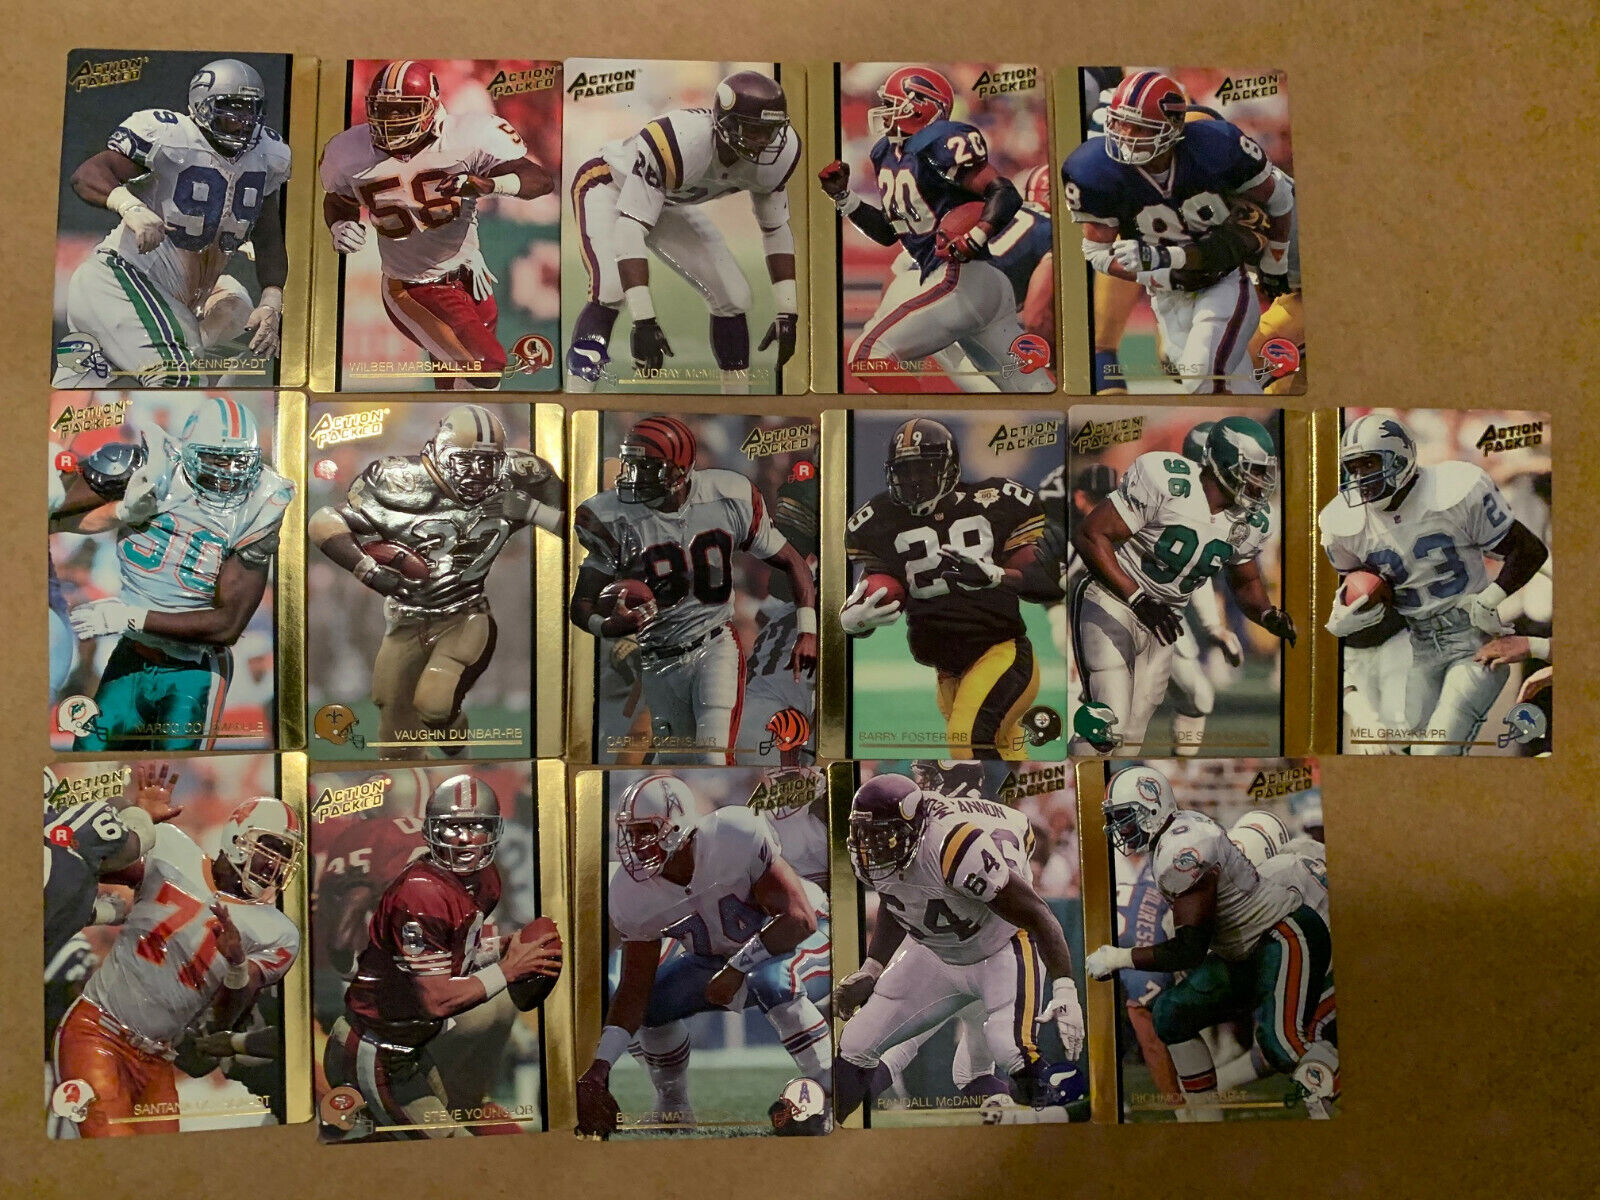 NFL Football Signed by 19(5 HOF) '93 NFLPA Awards Banquet+16 Action Packed Cards Без бренда - фотография #11